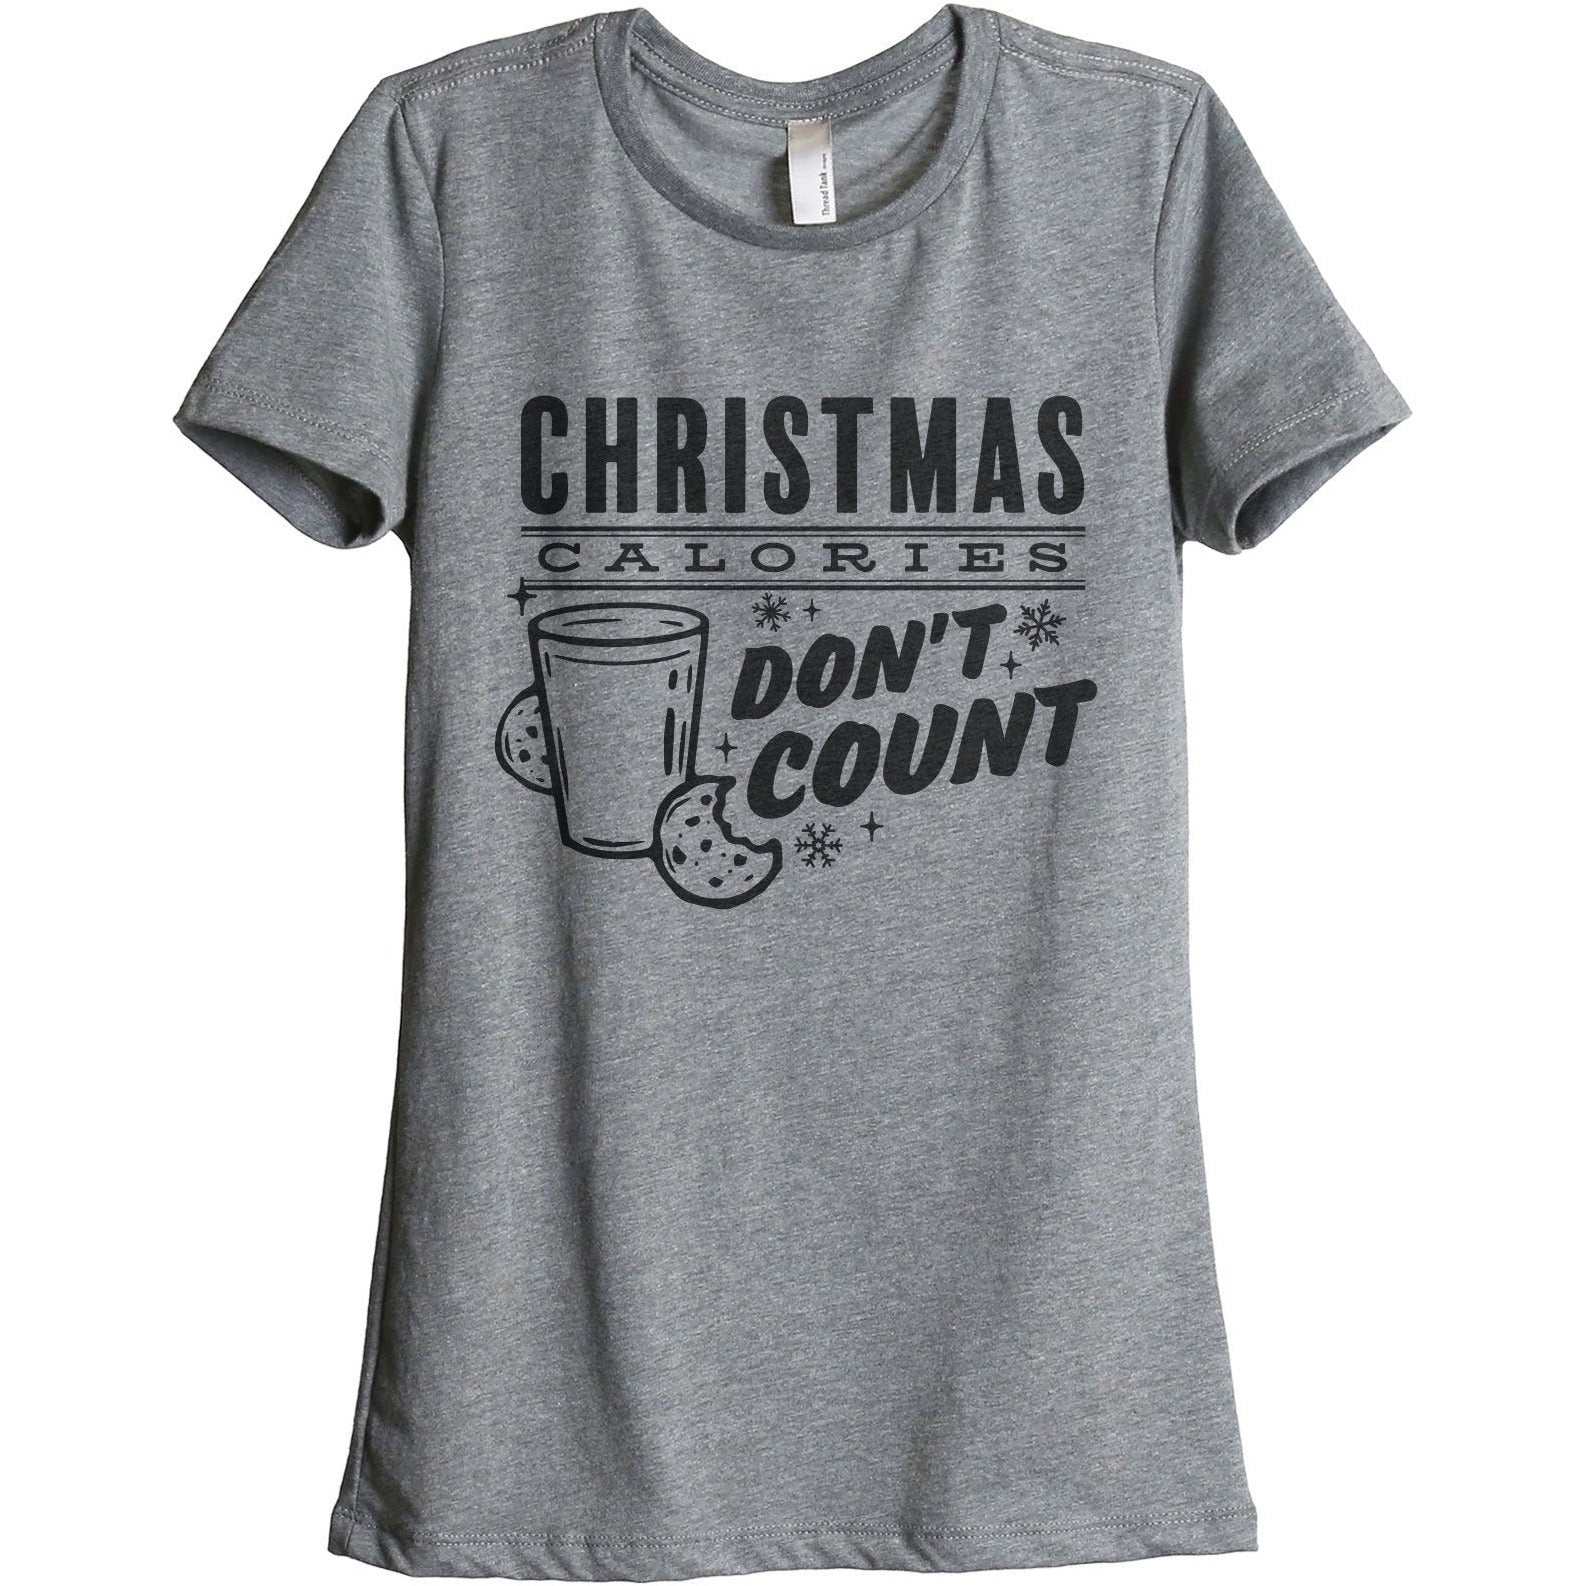 Christmas Calories Don't Count Women's Relaxed Crewneck T-Shirt Top Tee Heather Grey